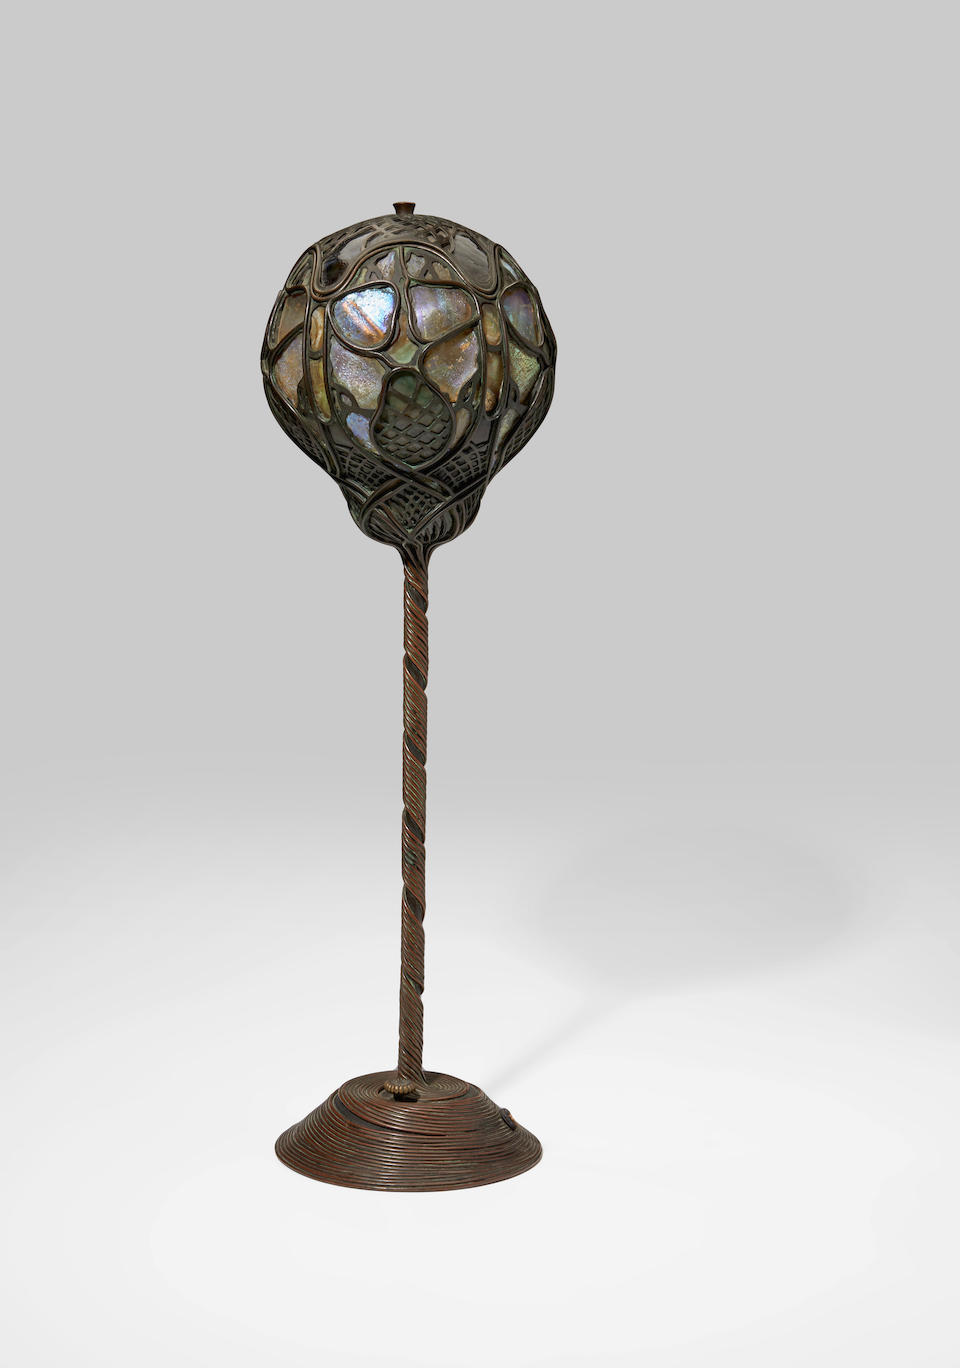 Tiffany Studios (1899-1919) Rare and Unusual Butterfly Table Lamp1897-98patinated bronze filigree, Favrile glass, apparently unmarkedheight 22in (55.5cm); diameter 6in (15cm)